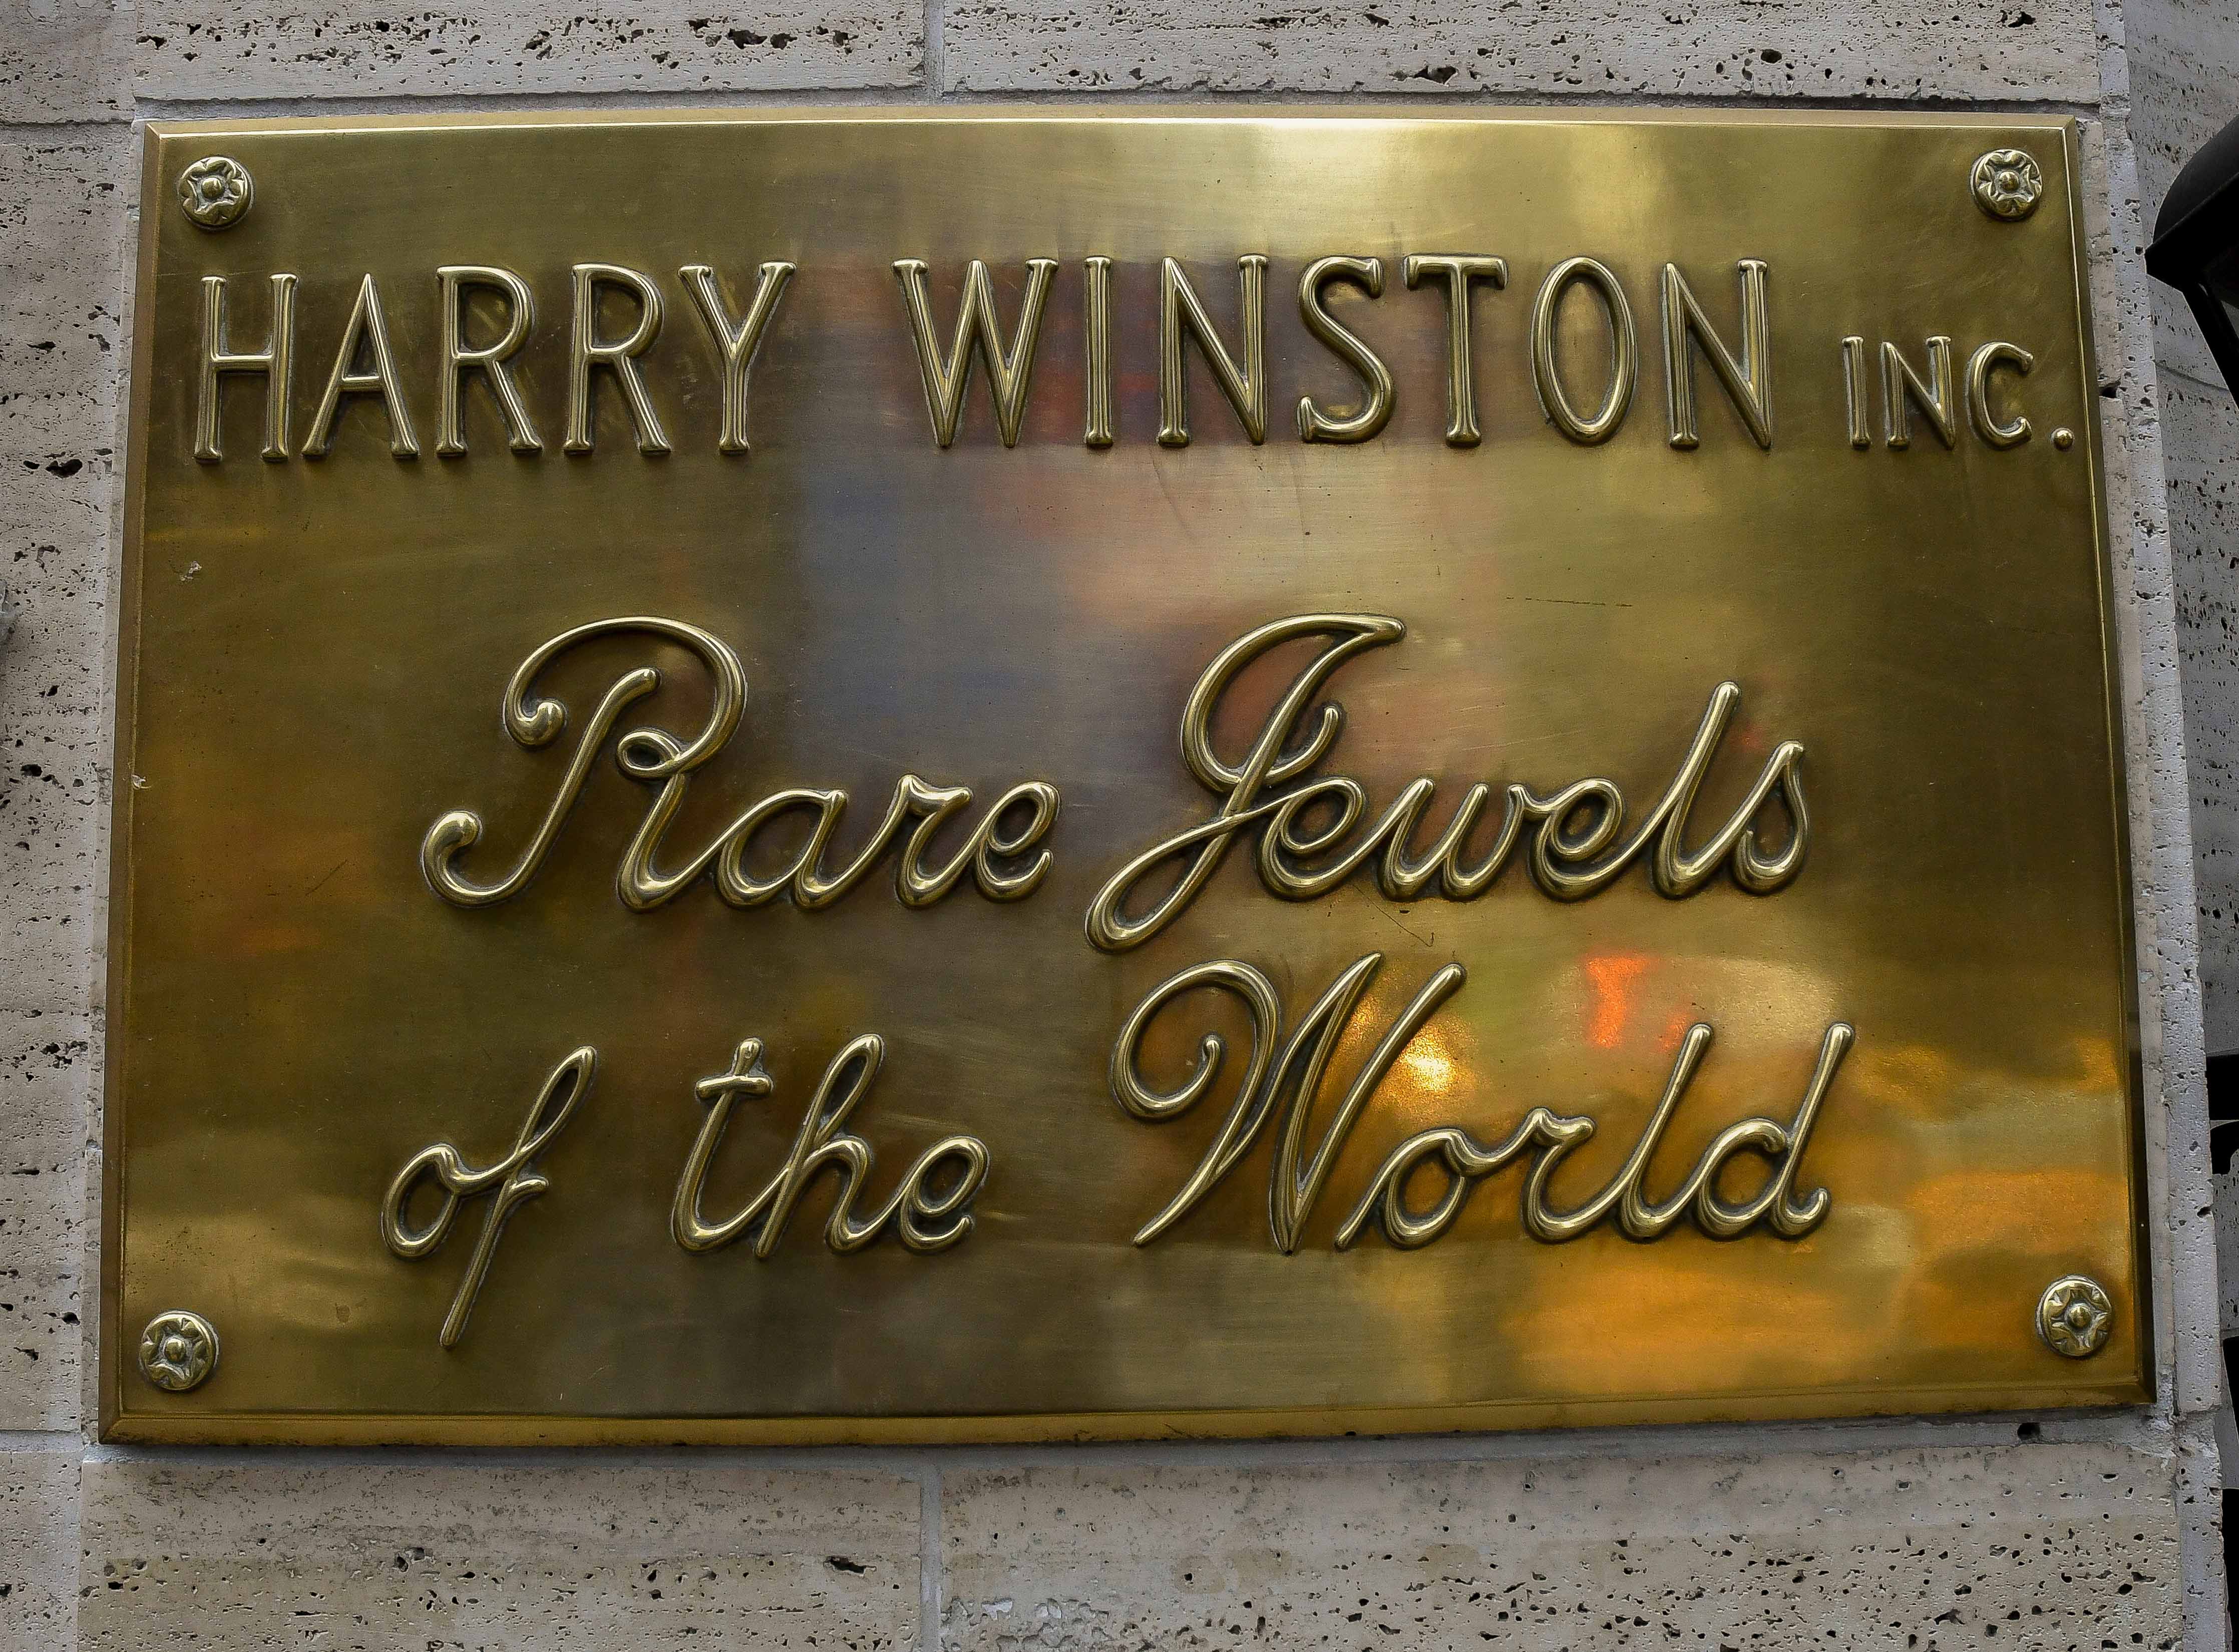 A gold plaque that reads "Harry Winston Inc.: Rare Jewels of the World"